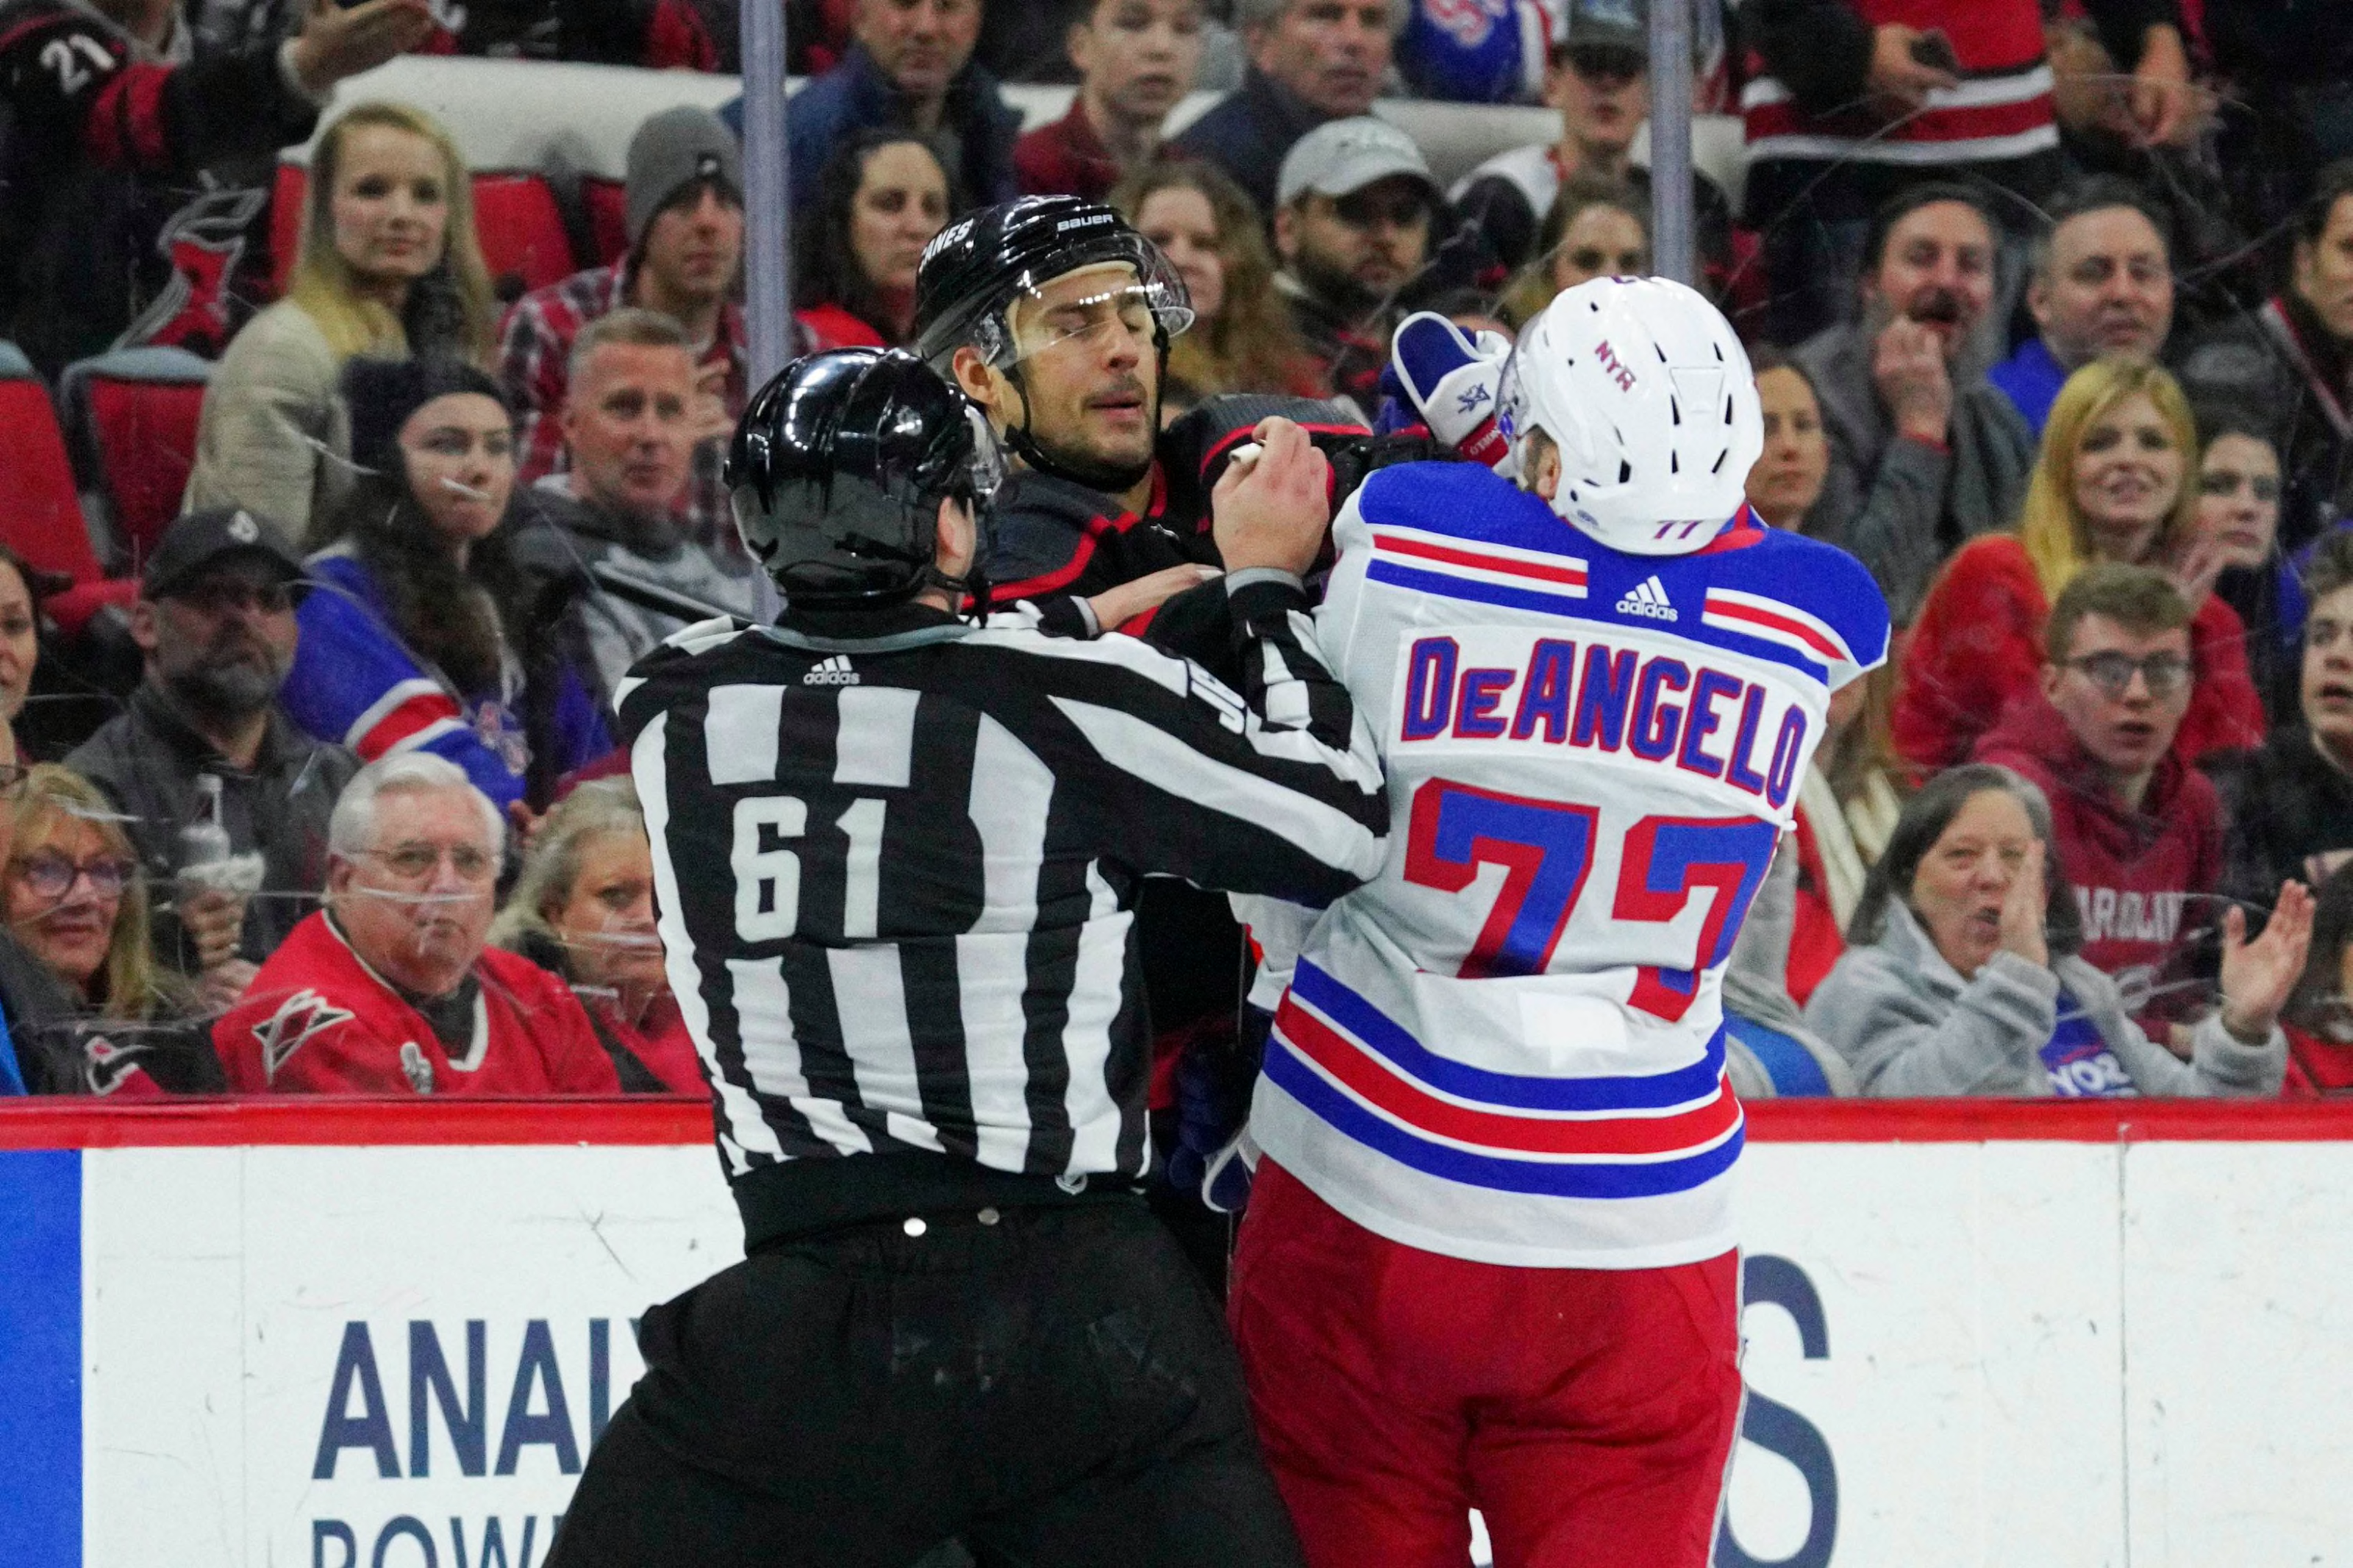 New York Rangers must move on from Tony DeAngelo mess and focus on